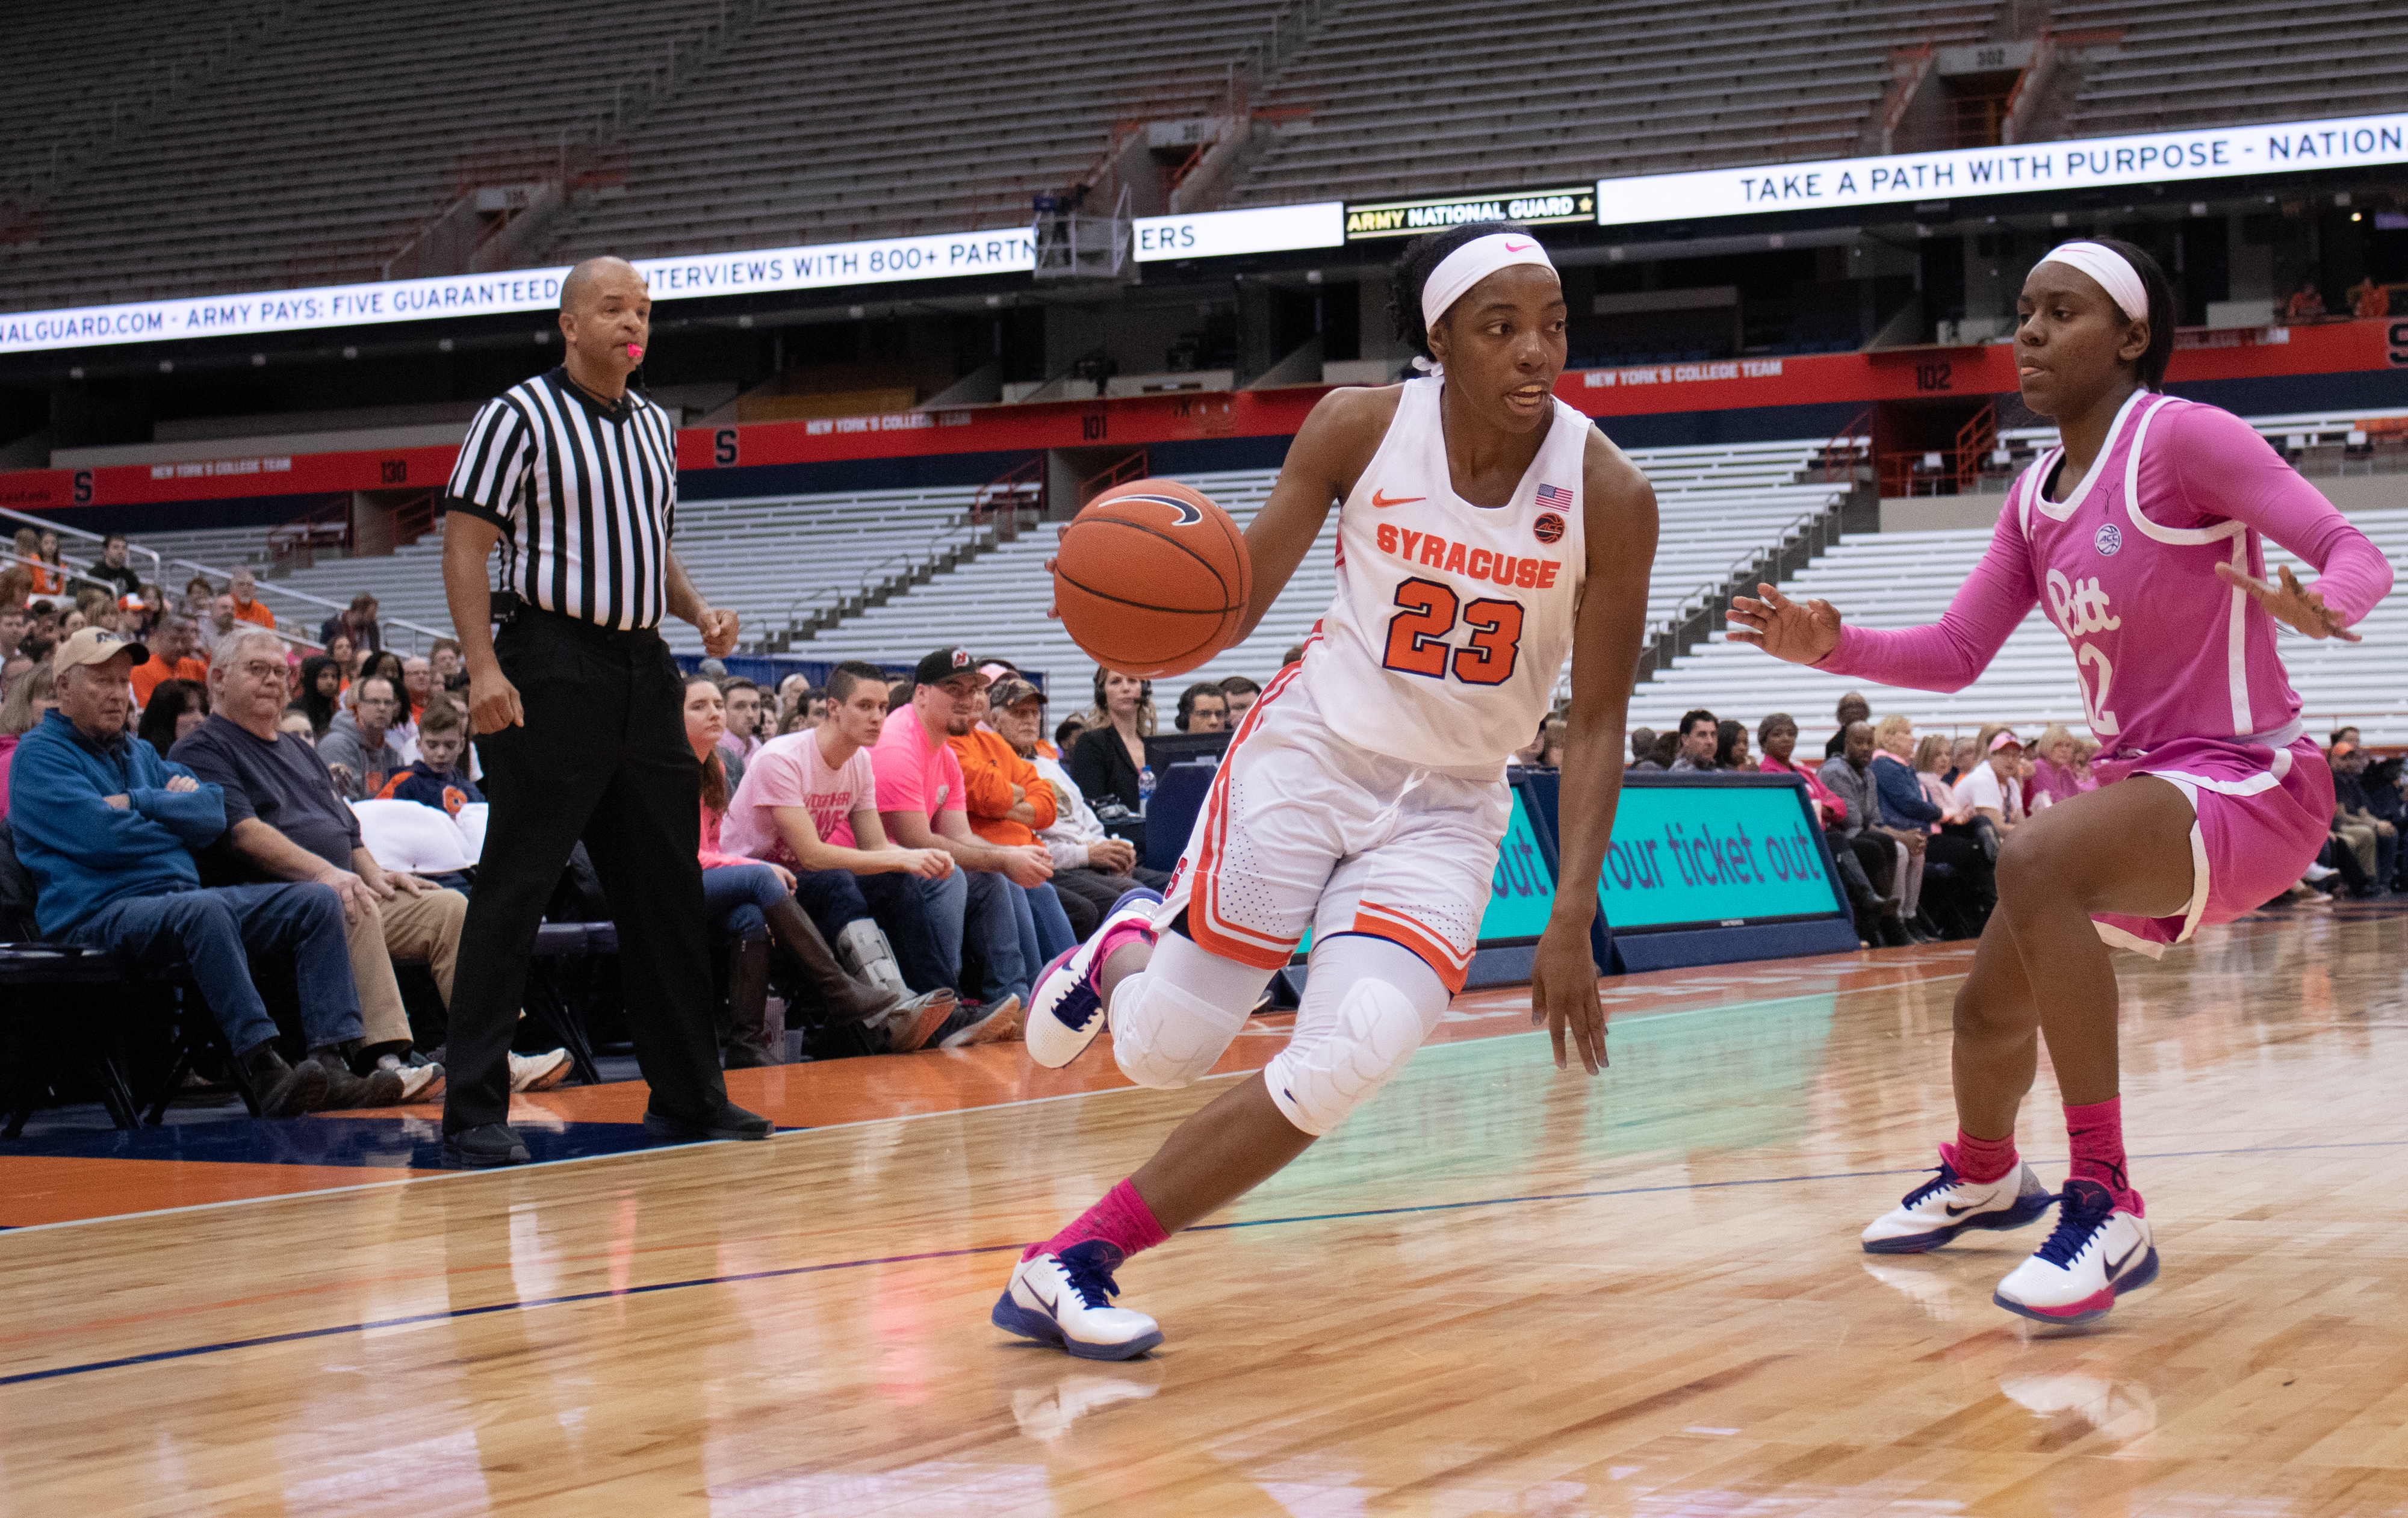 Syracuse University's guard, Kiara Lewis, 23, pushes past a University of Pittsburgh defender during a college basketball game on February 16, 2020.